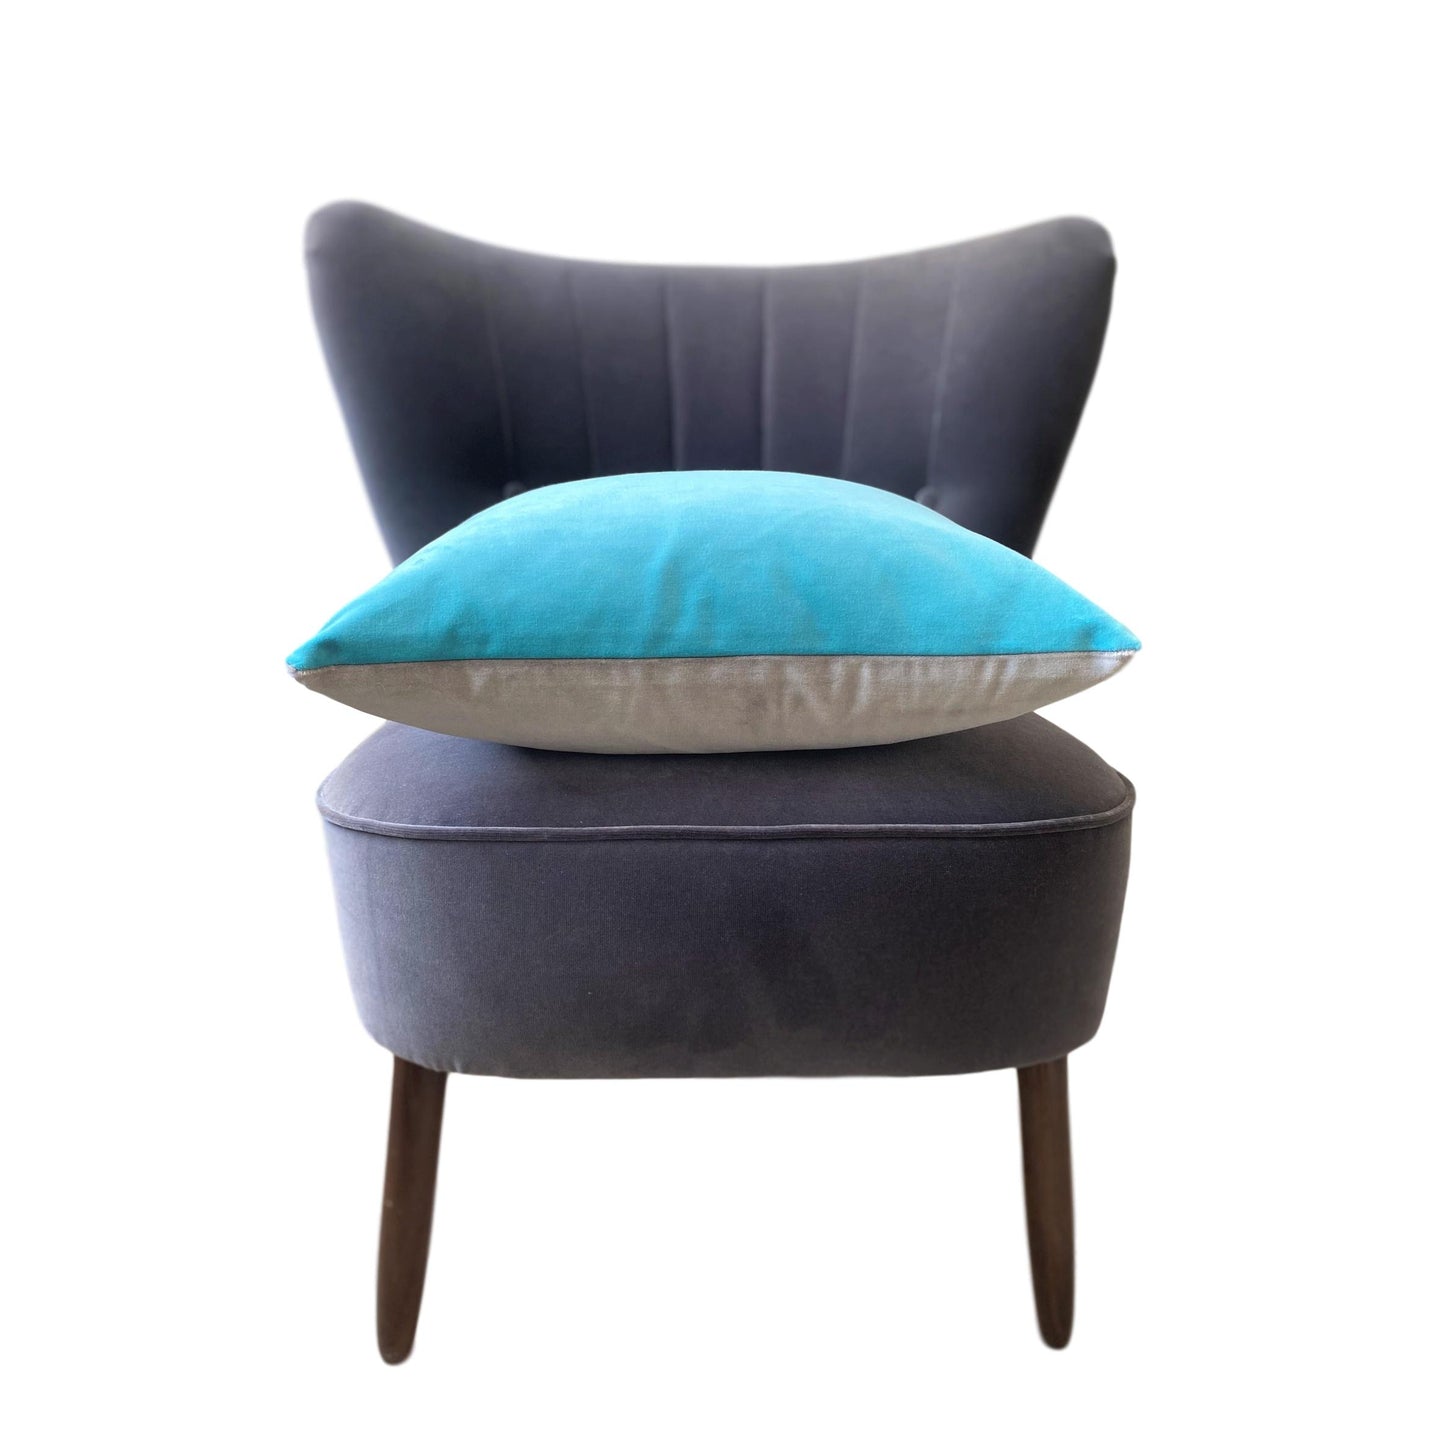 Turquoise and grey cushions by luxe 39